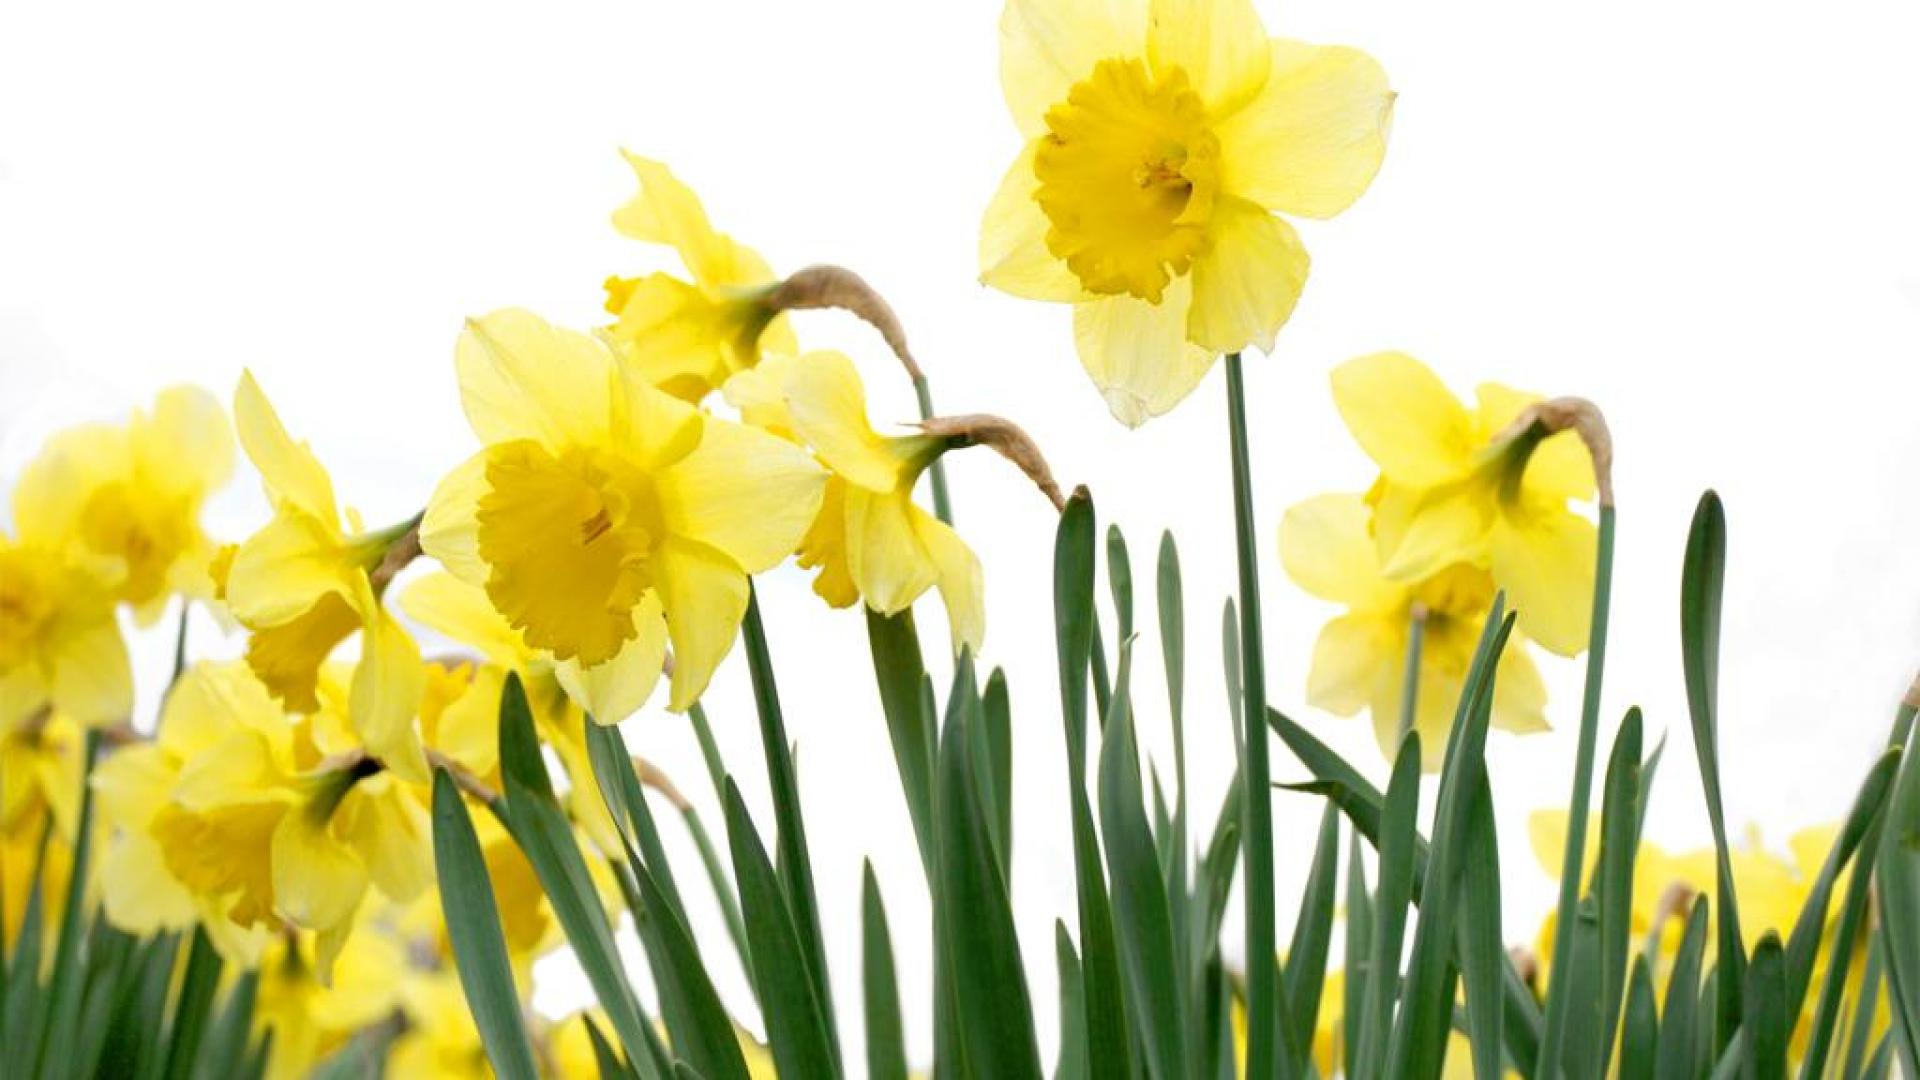 Spring Daffodil Wallpaper High Definition Quality Widescreen